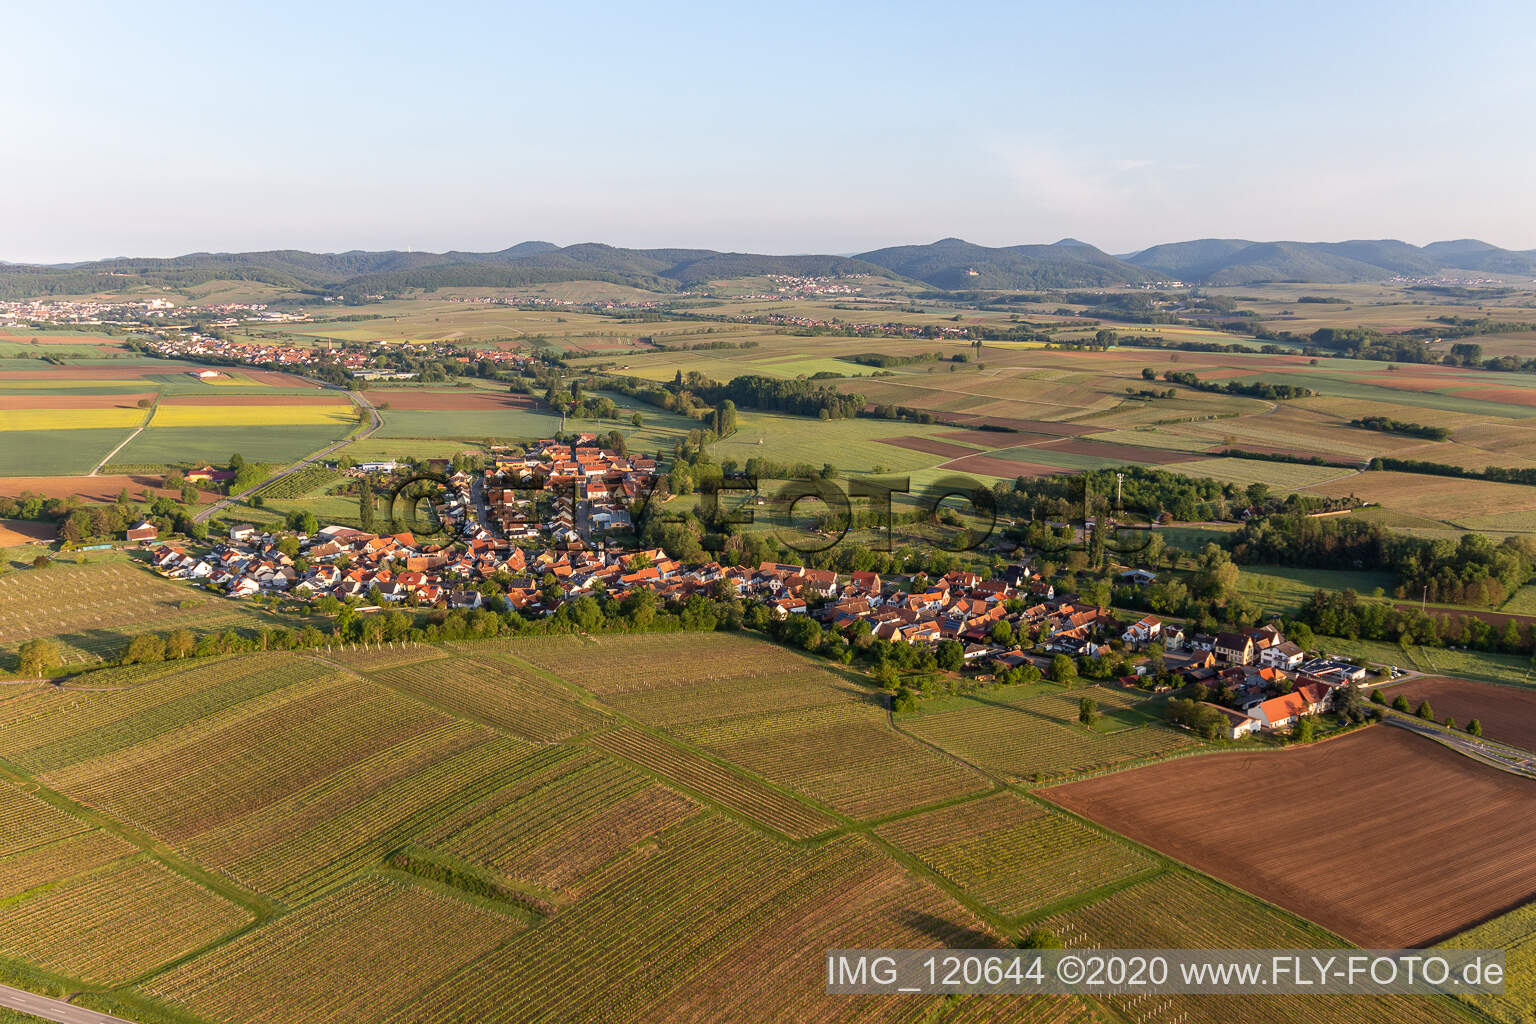 Oberhausen in the state Rhineland-Palatinate, Germany seen from above